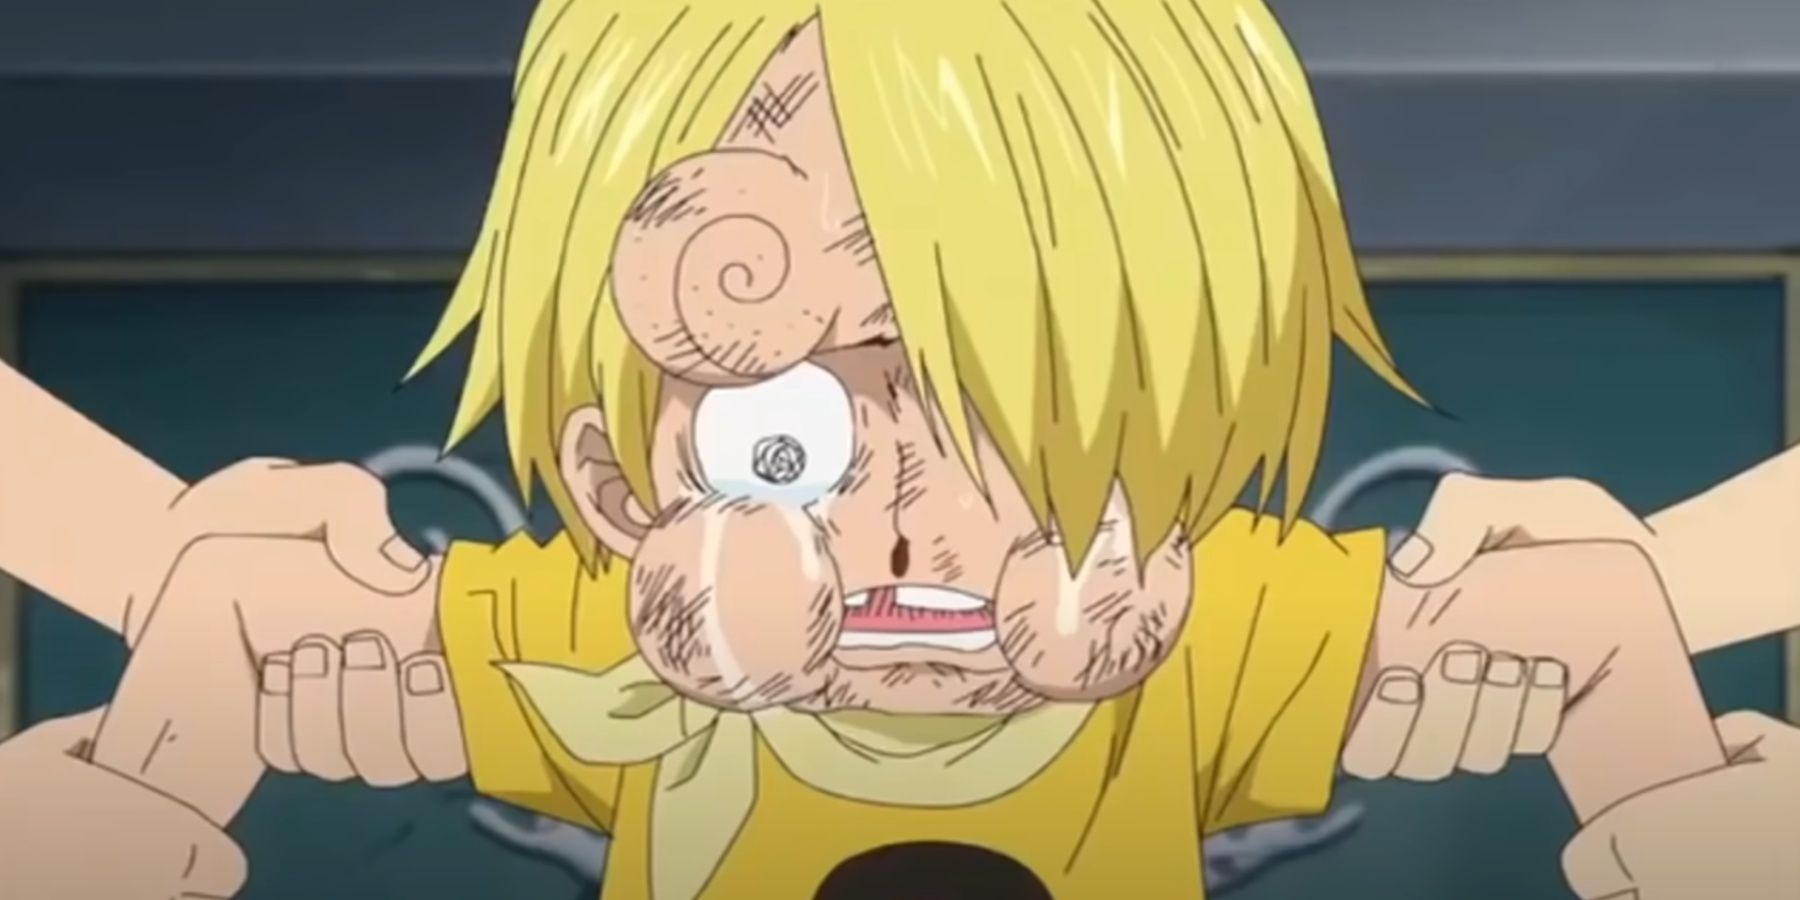 Young Sanji getting beat up by his siblings in One Piece